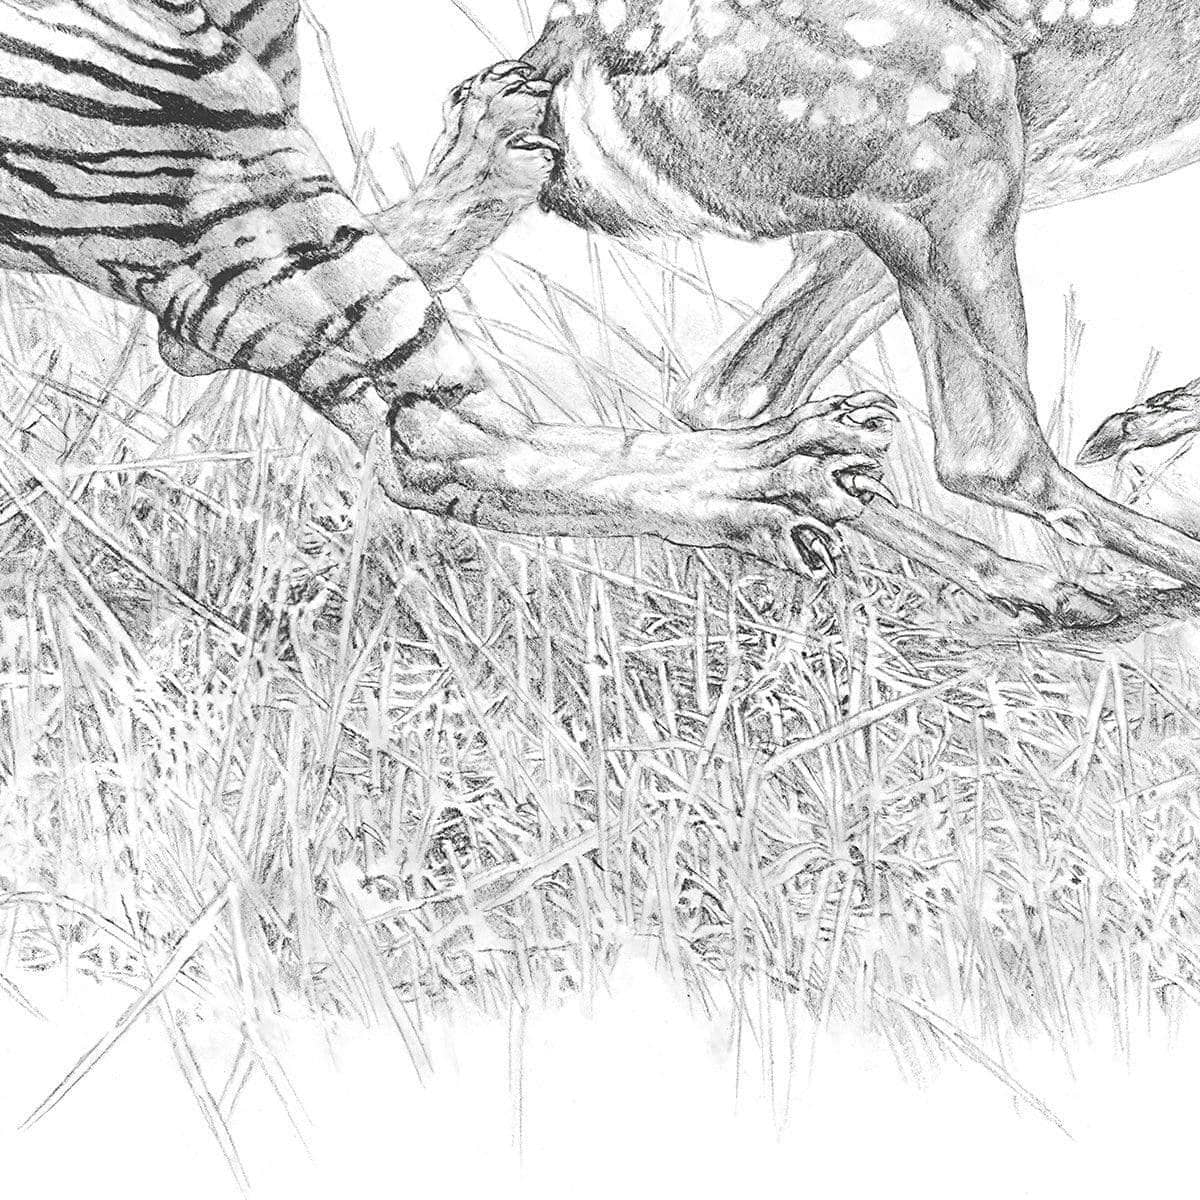 Bengal Tiger Pulling Down a Chital Deer - Canvas Print | Artwork by Glen Loates